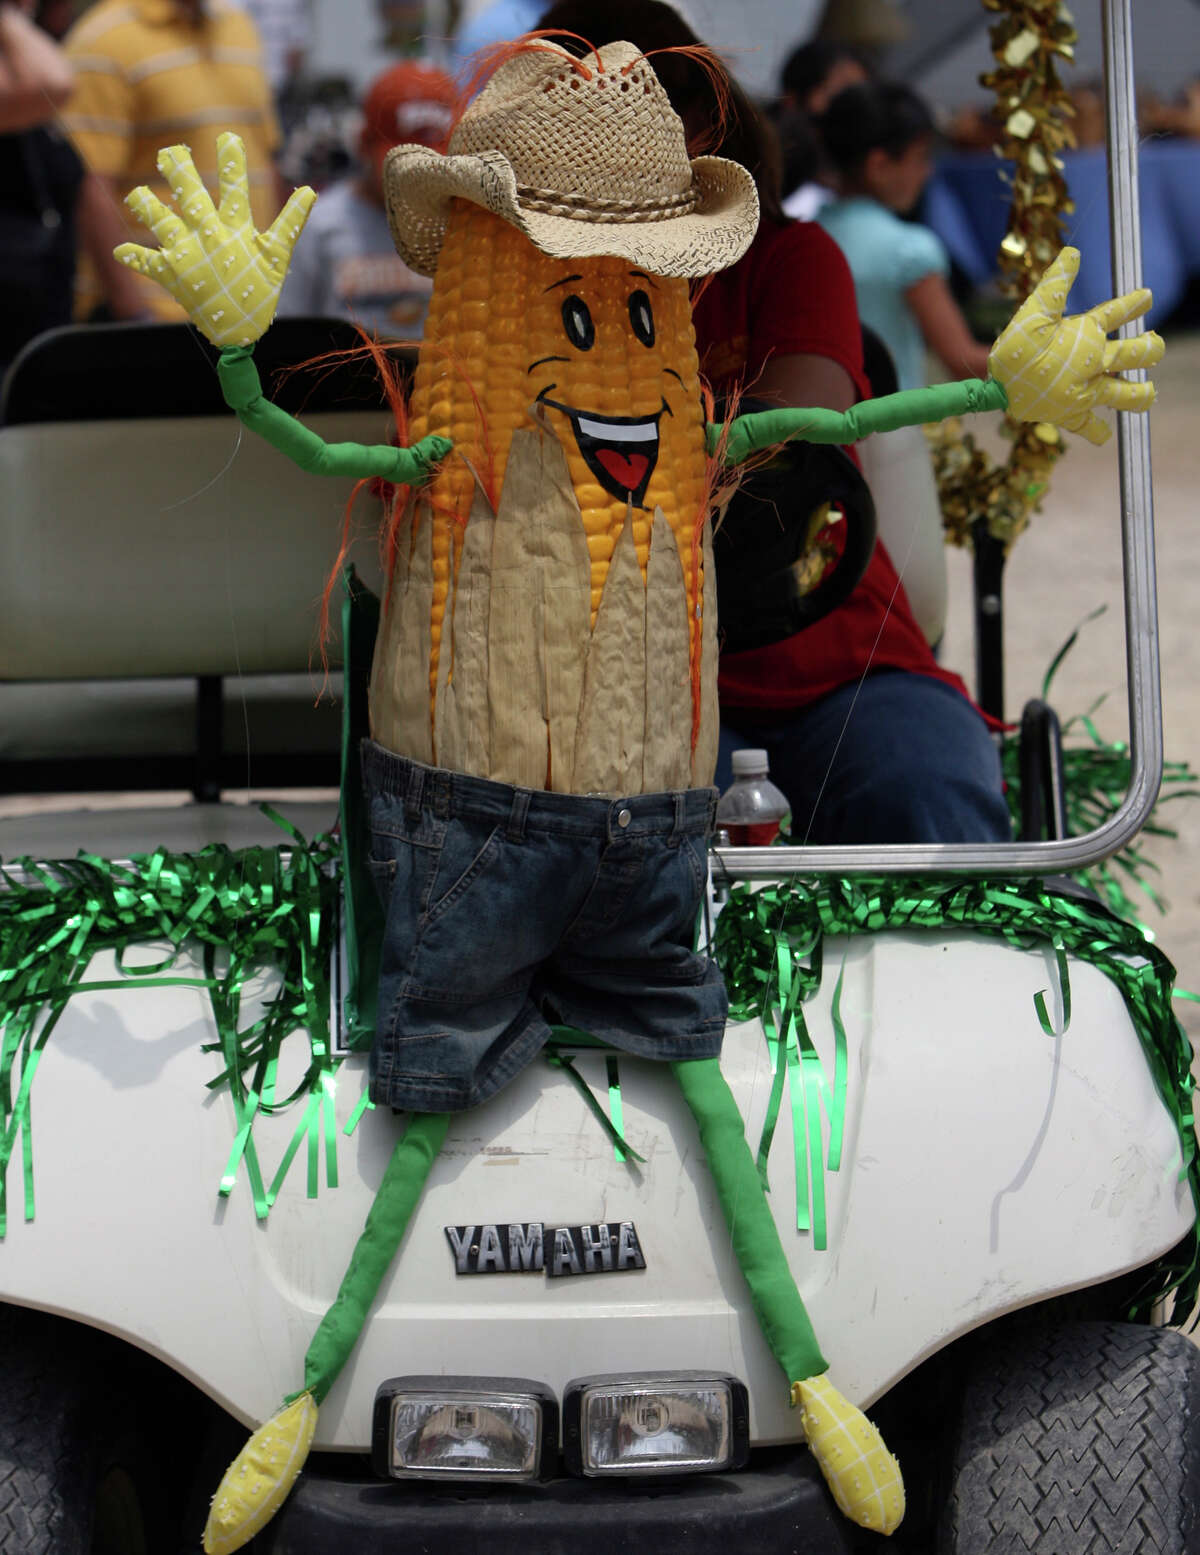 A worker at the Helotes Cornyval drives a golf cart with a large corn character mounted on the front on Sunday May 4, 2008. JOHN DAVENPORT/jdavenport@express-news.net